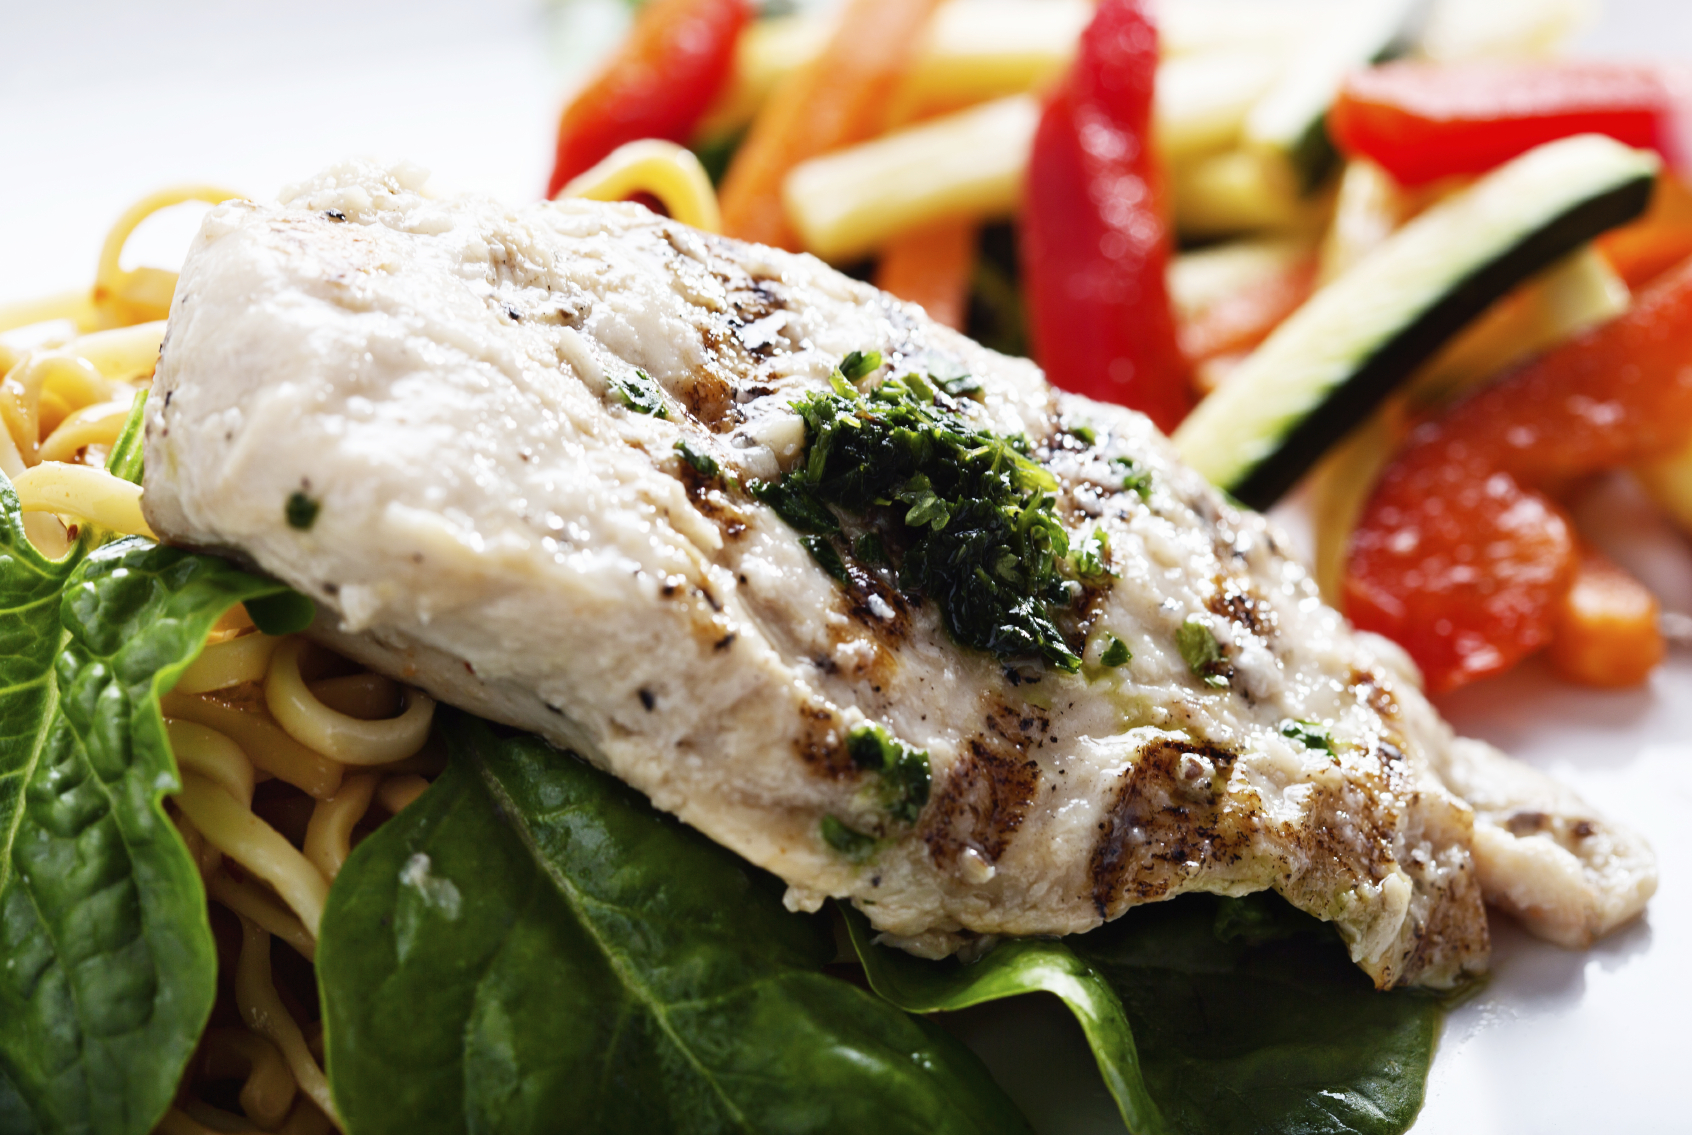 Succulent steamed seared chicken breast with pesto and vegetables